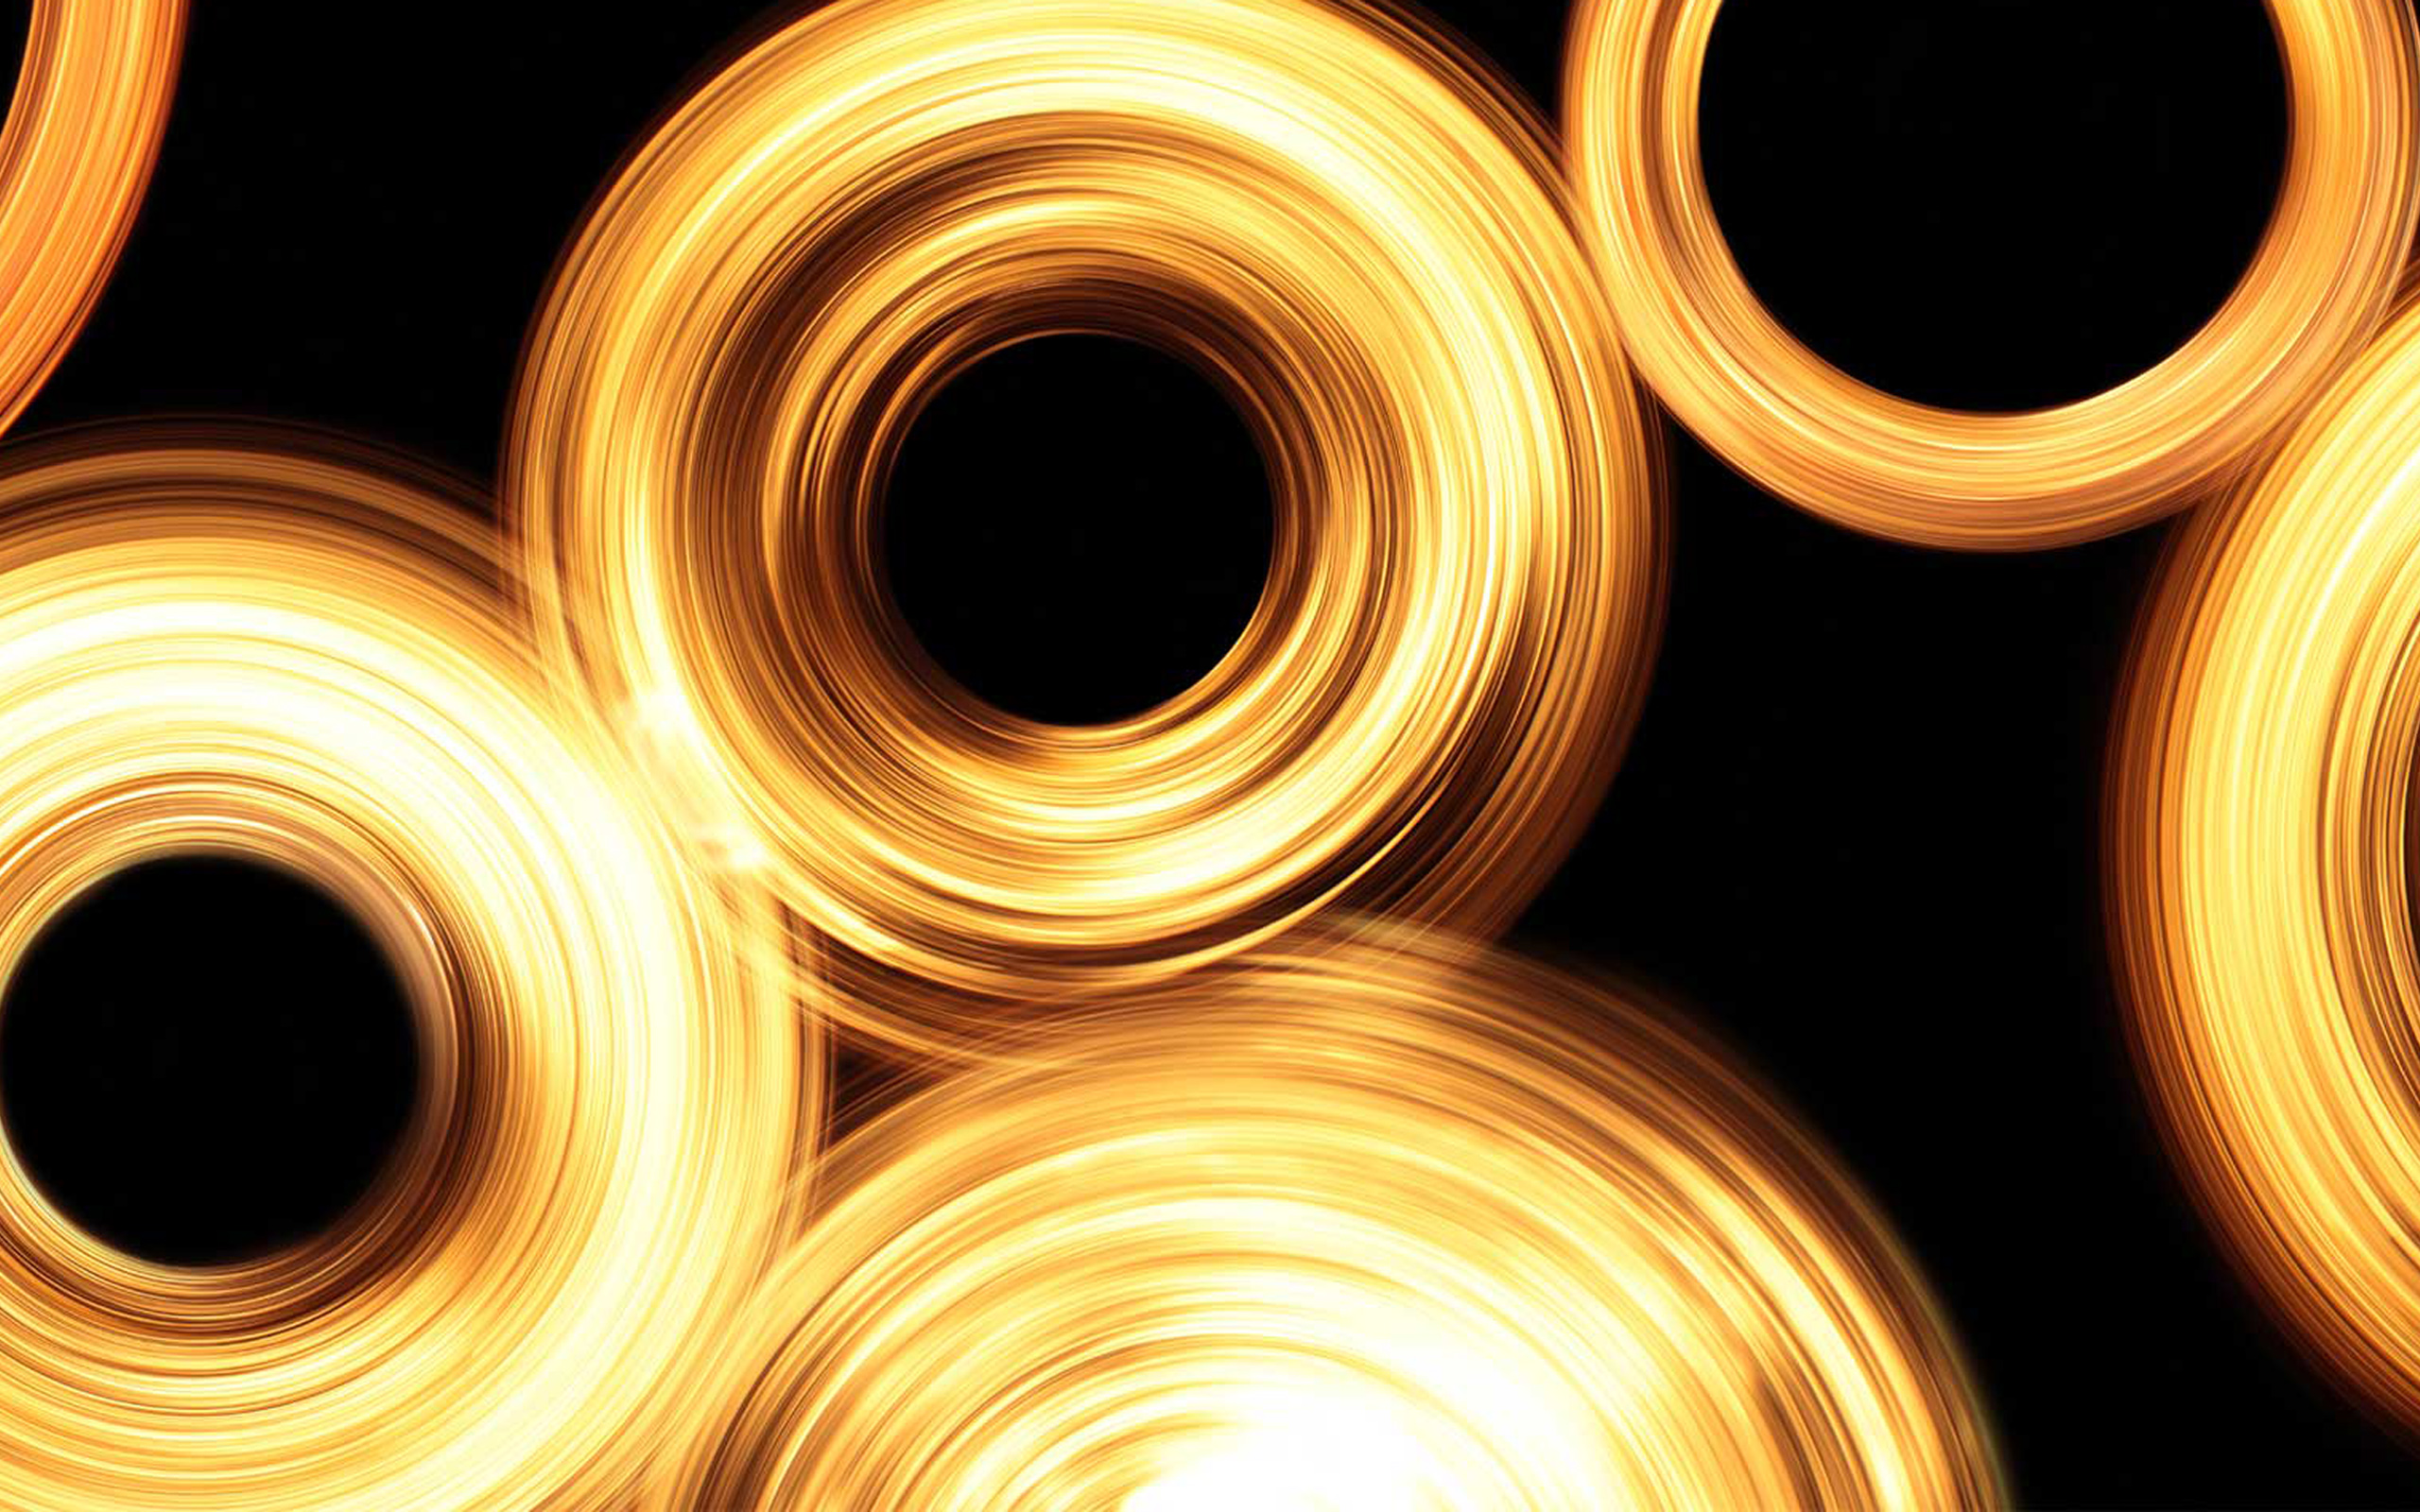 Download wallpaper Black Background with Golden Lights Circles, light circles texture, neon background, background with light circles for desktop with resolution 2560x1600. High Quality HD picture wallpaper